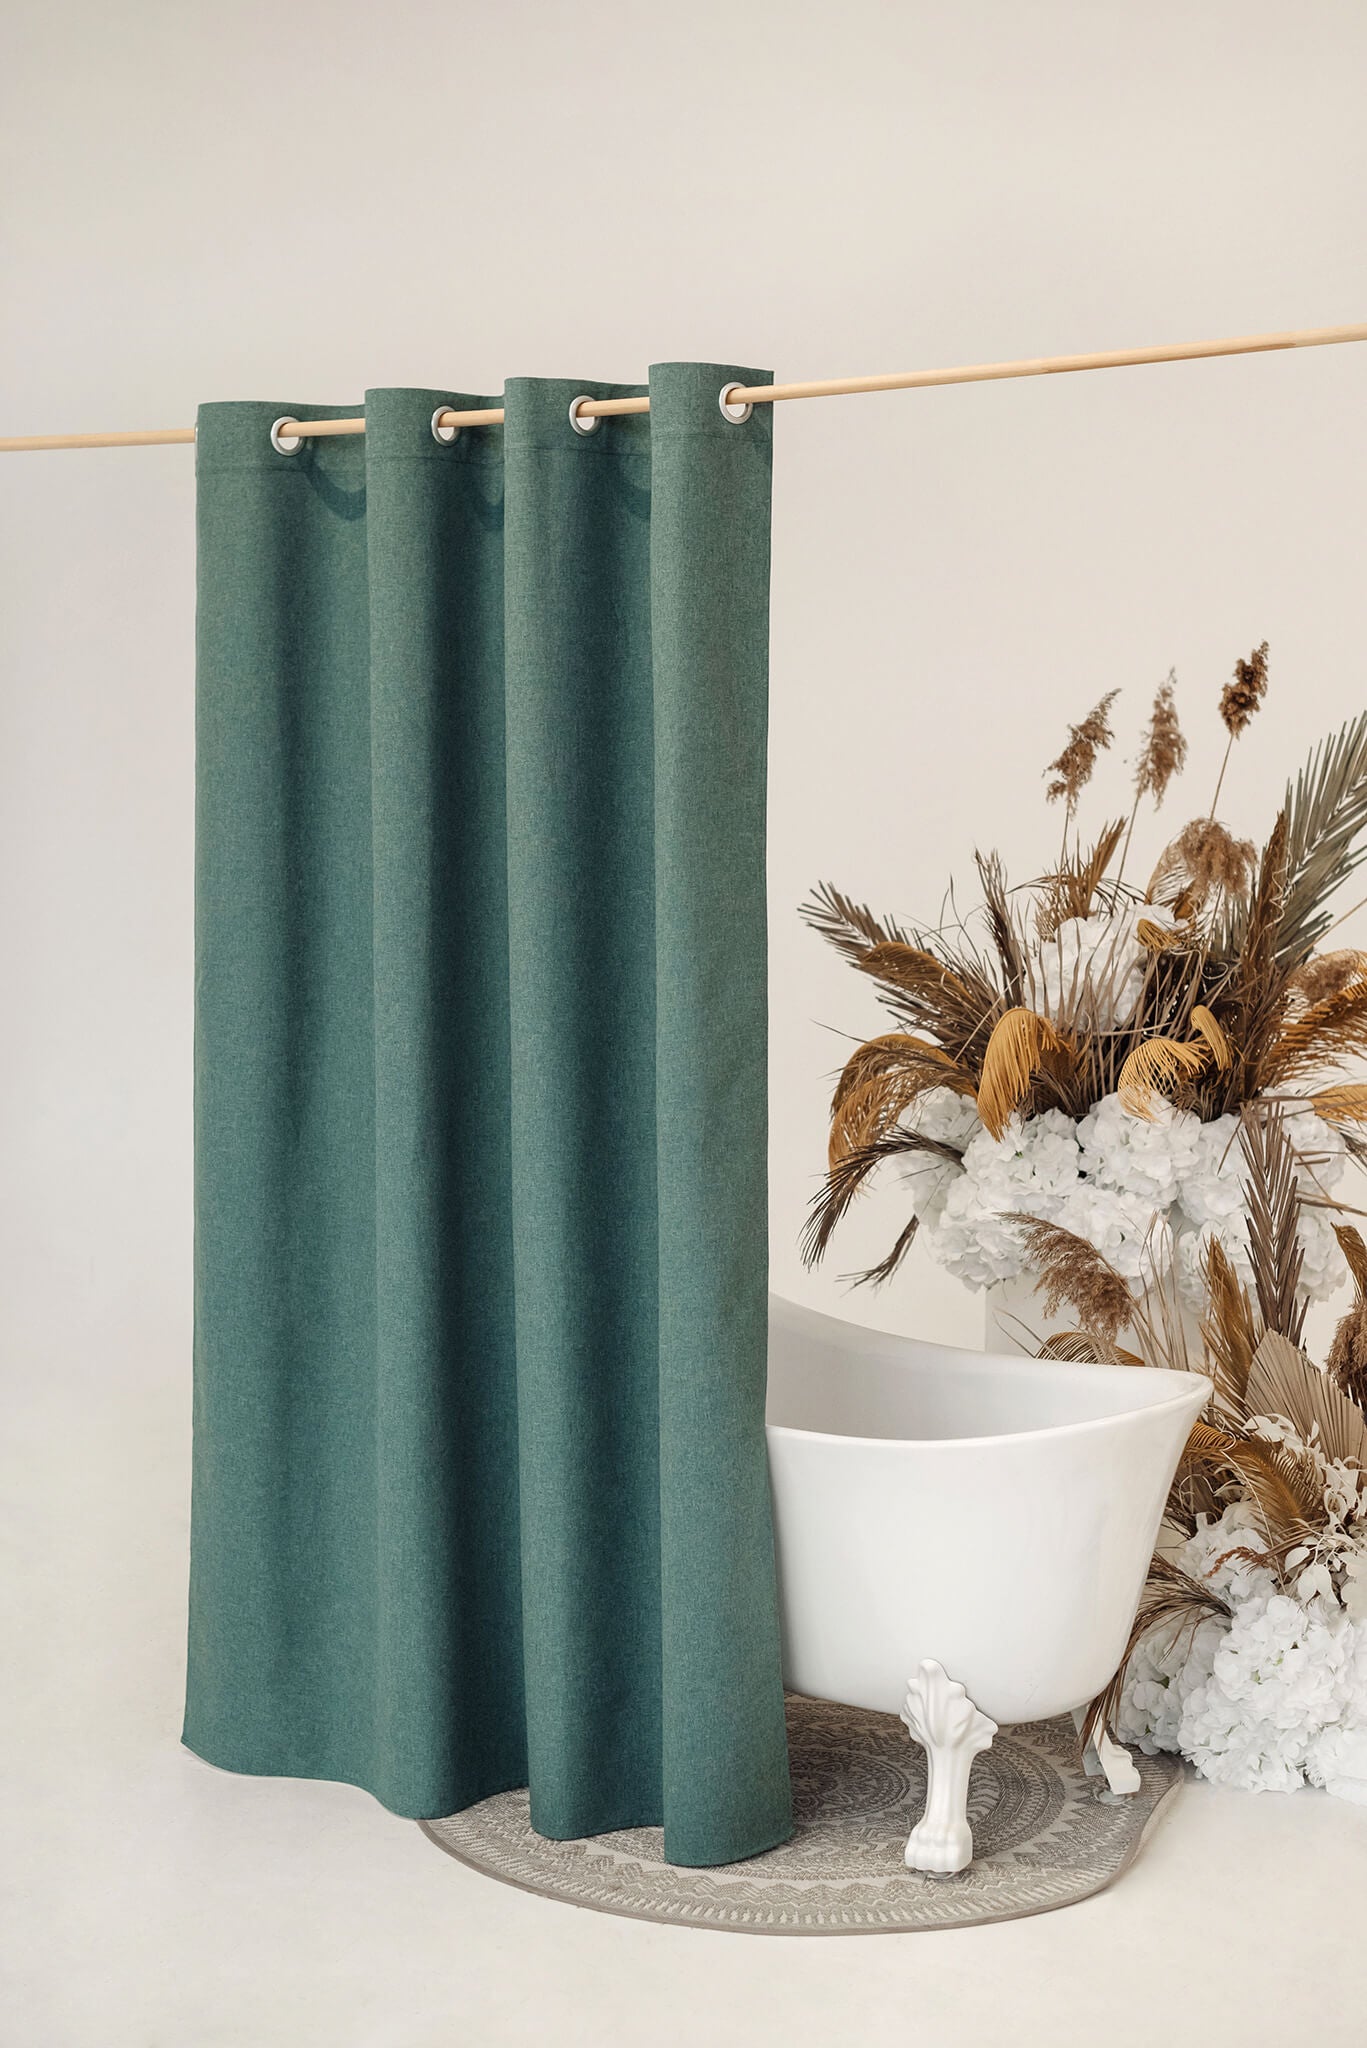 Green waterproof shower curtain panel with grommets for rod